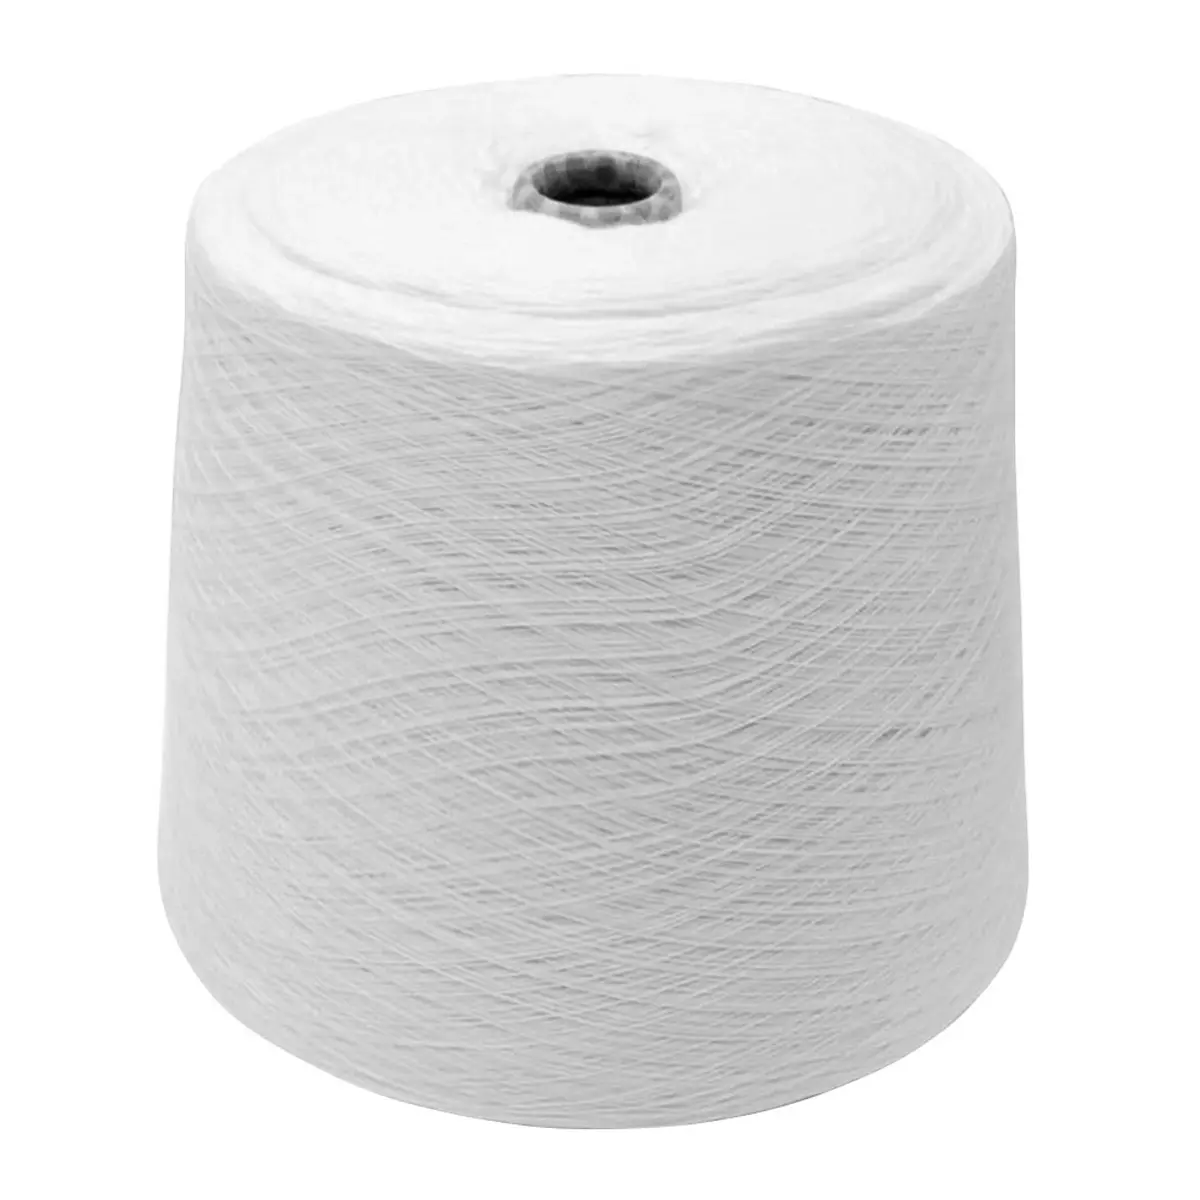 Cotton yarn for textile production wholesale from manufacturer low prices natural cotton yarn